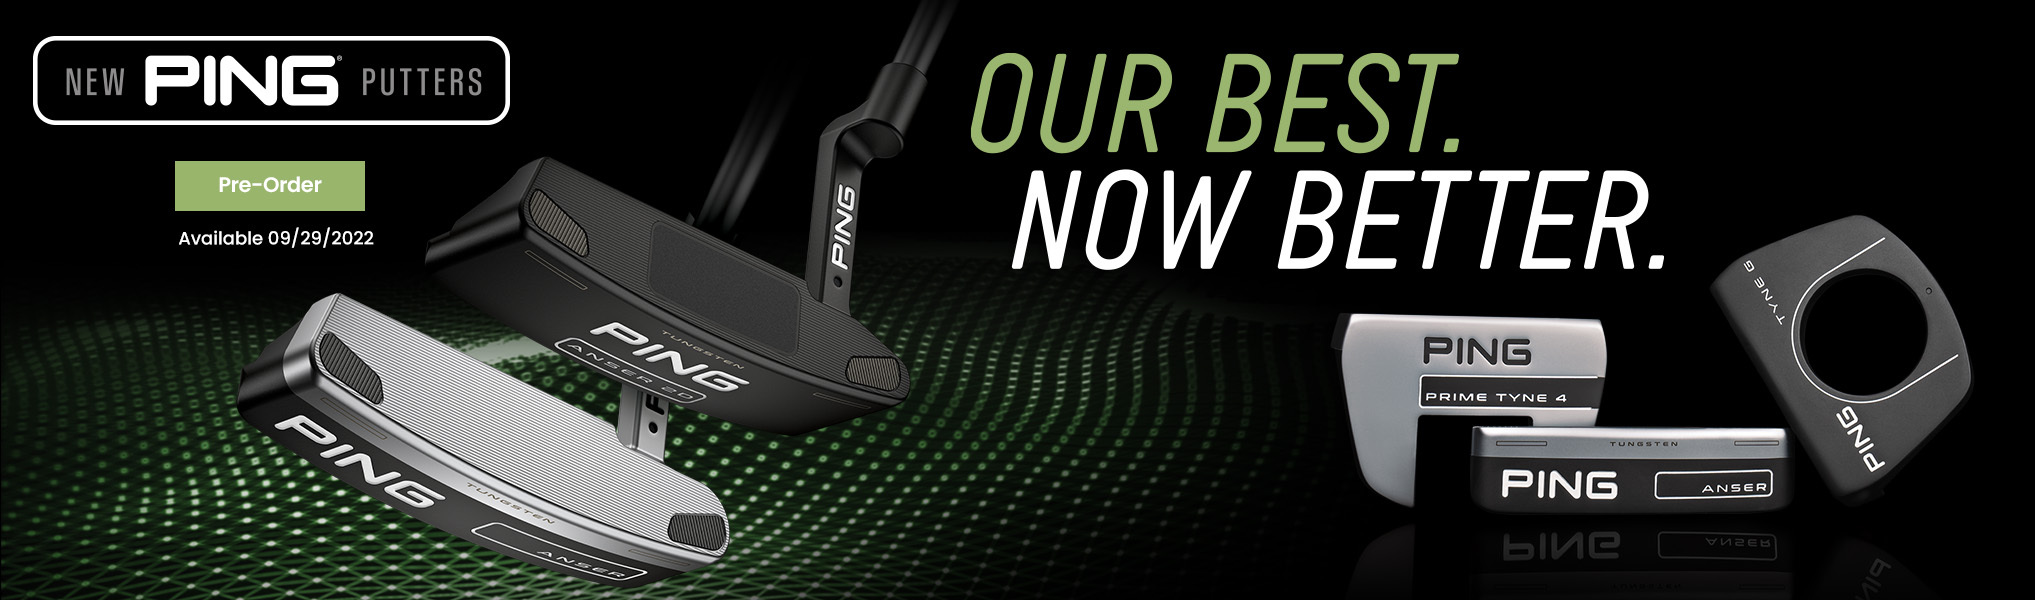 Ping Putters PreSale